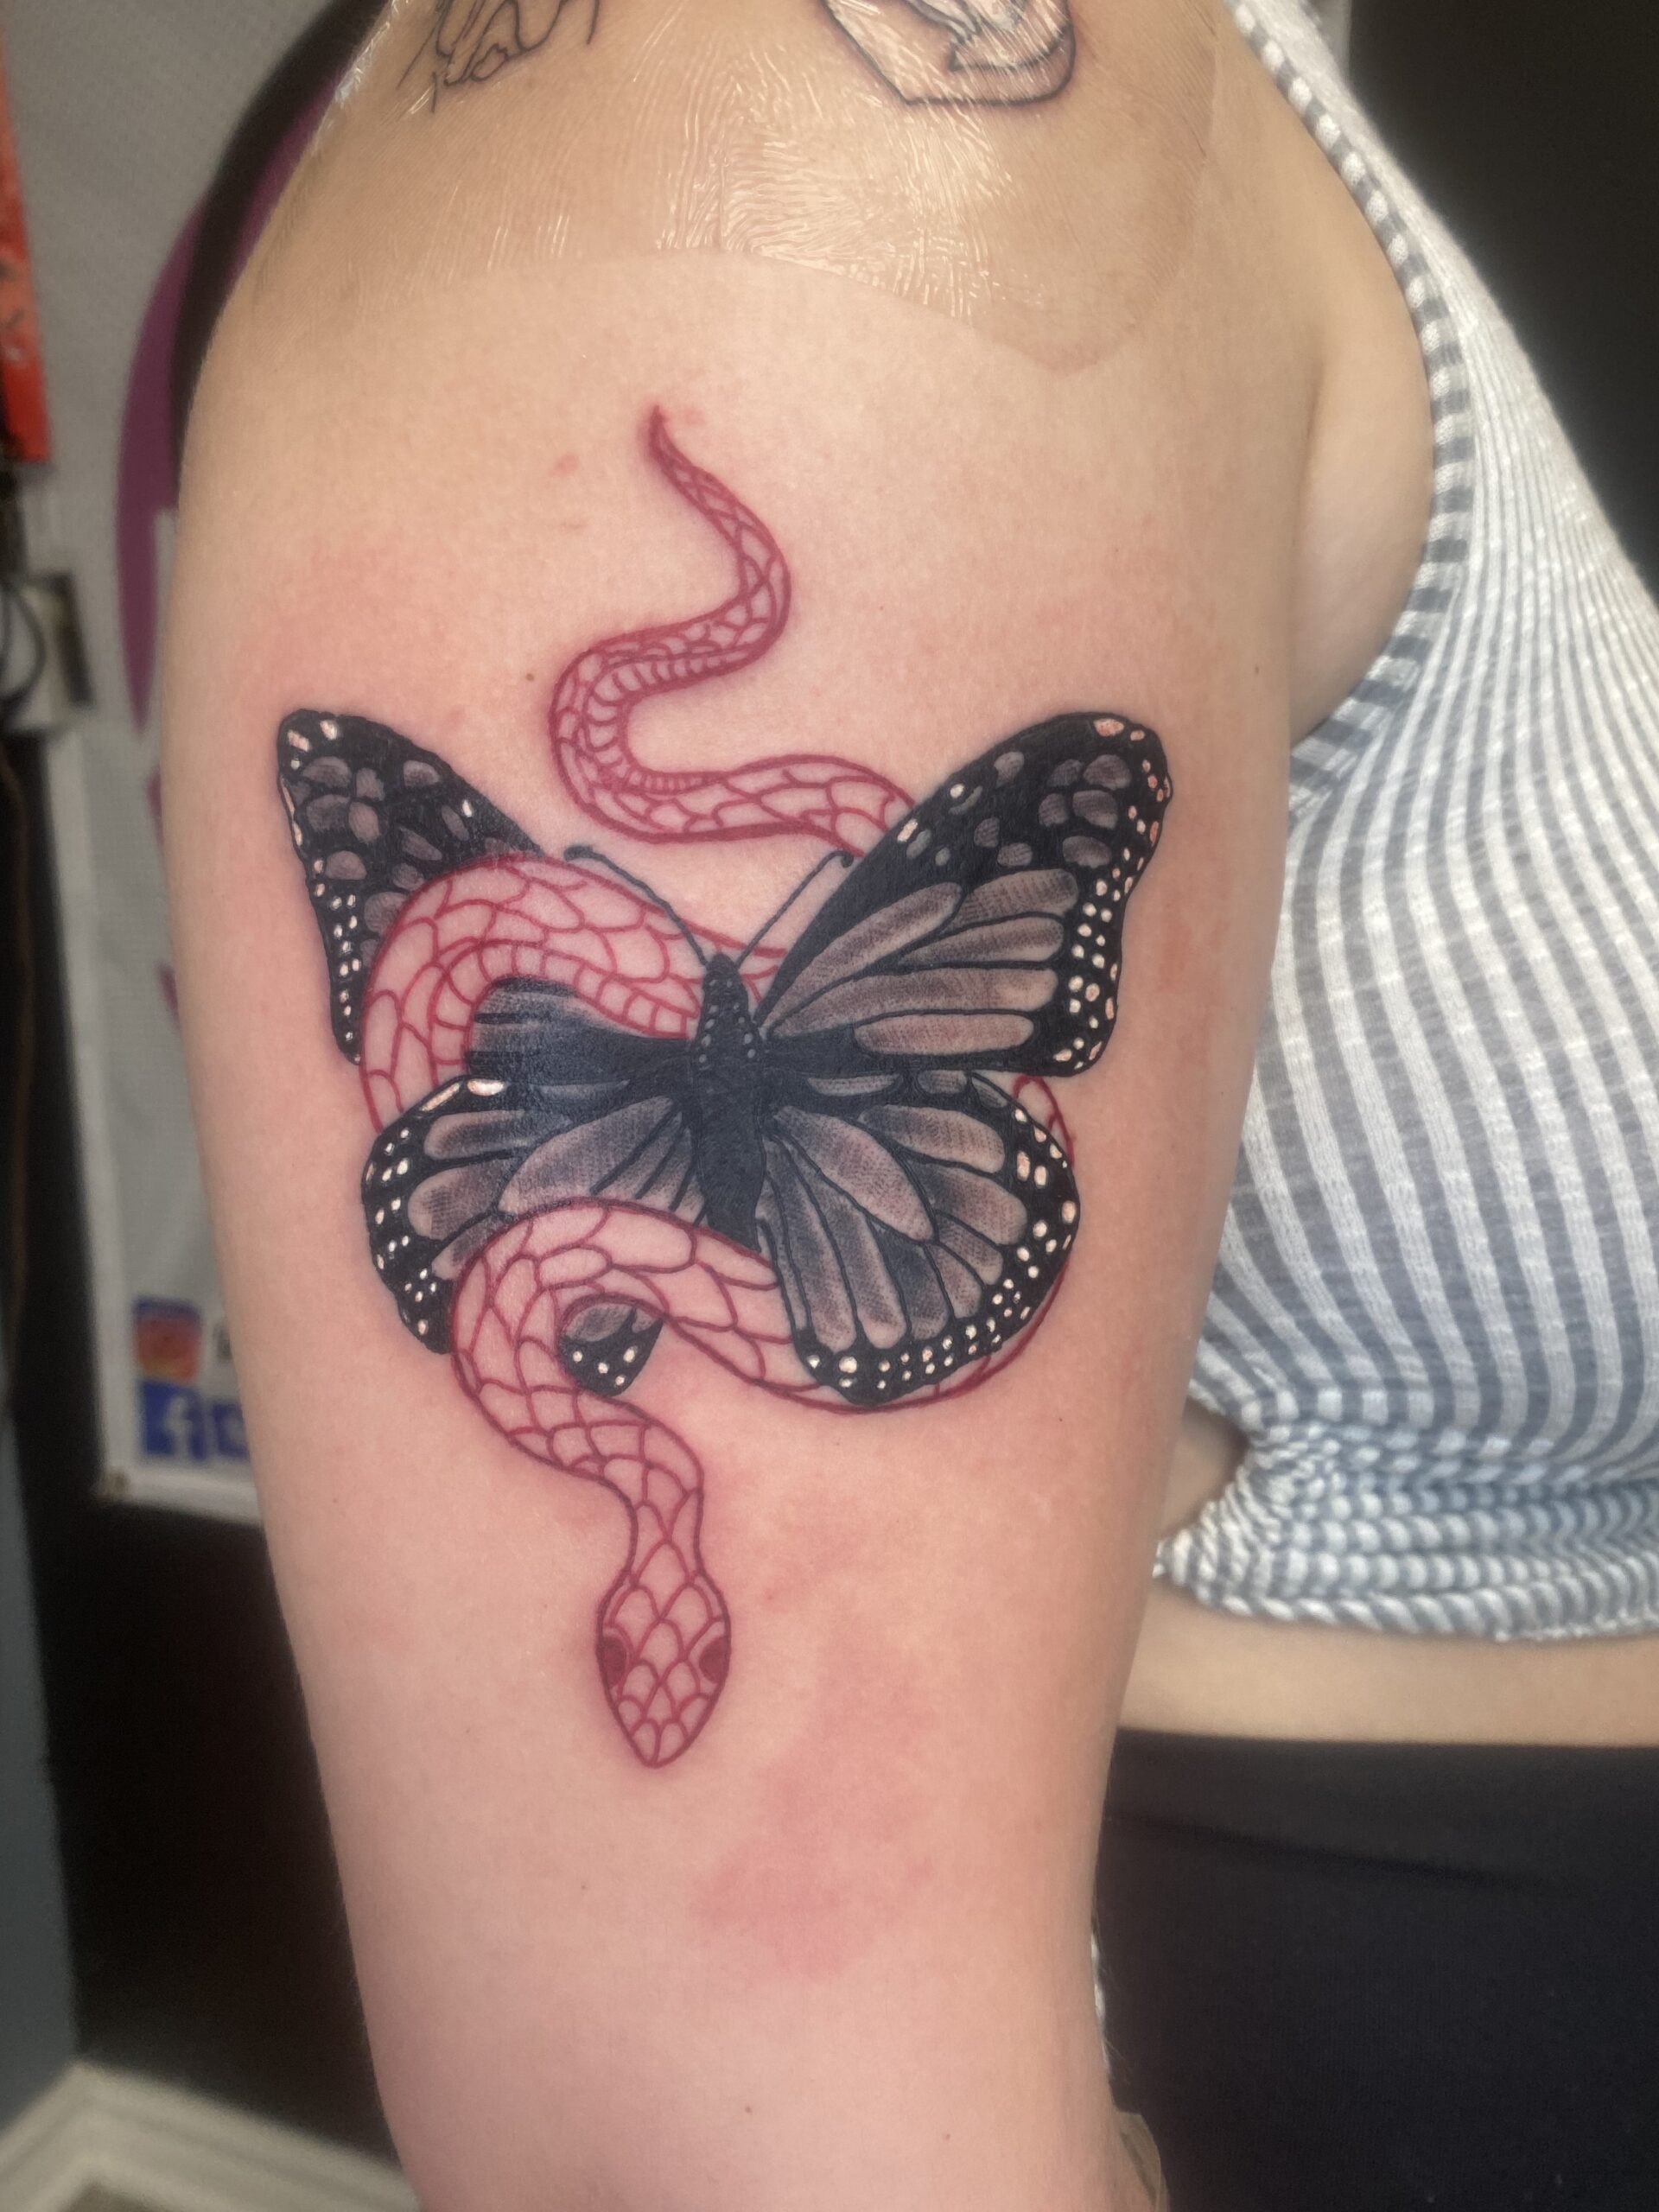 Snake and Butterfly Tattoo Meaning  Explained   MyTatouagecom